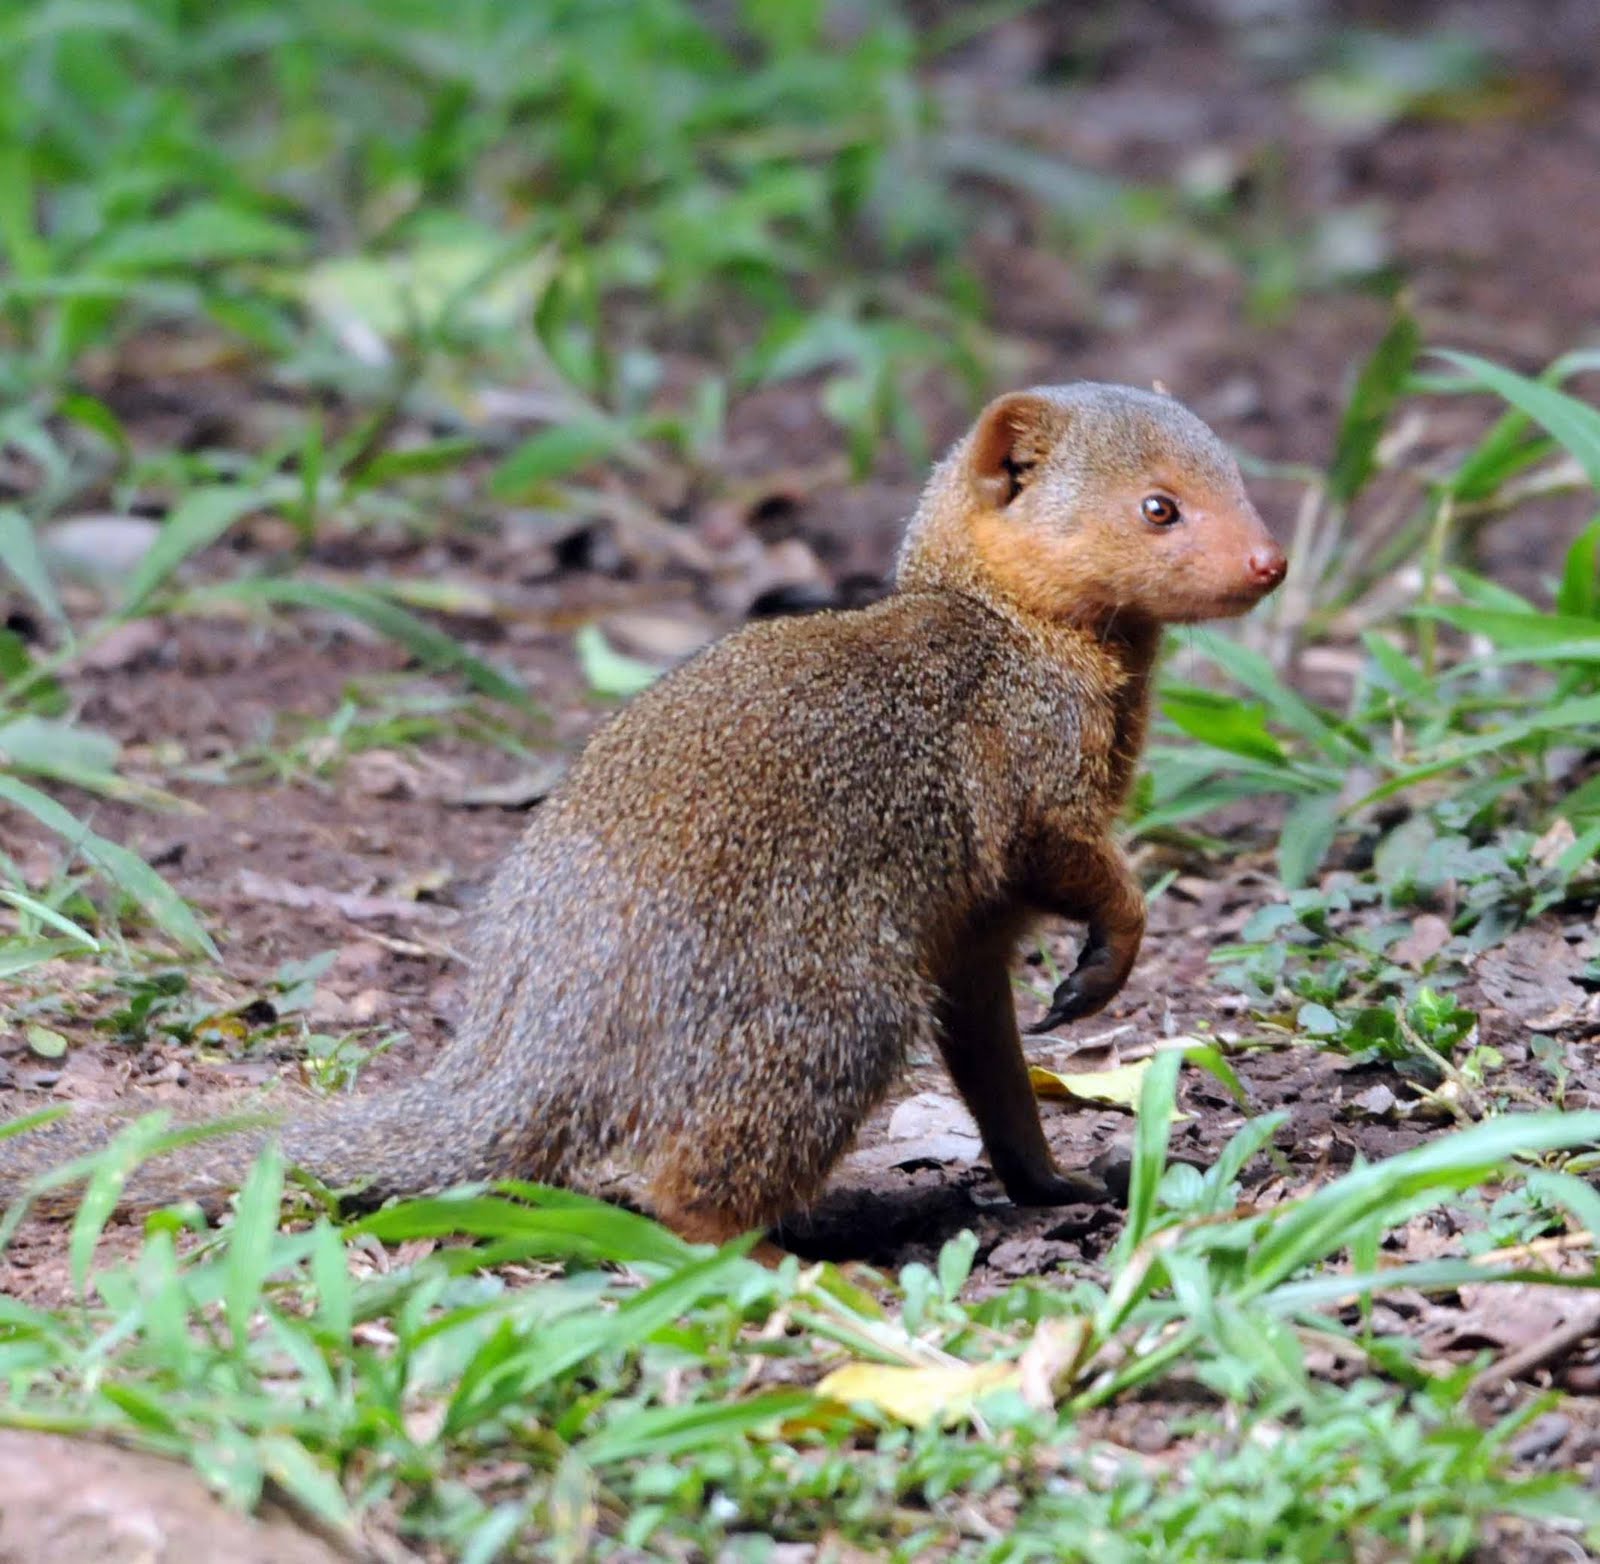 Albums 94+ Images show me pictures of a mongoose Sharp